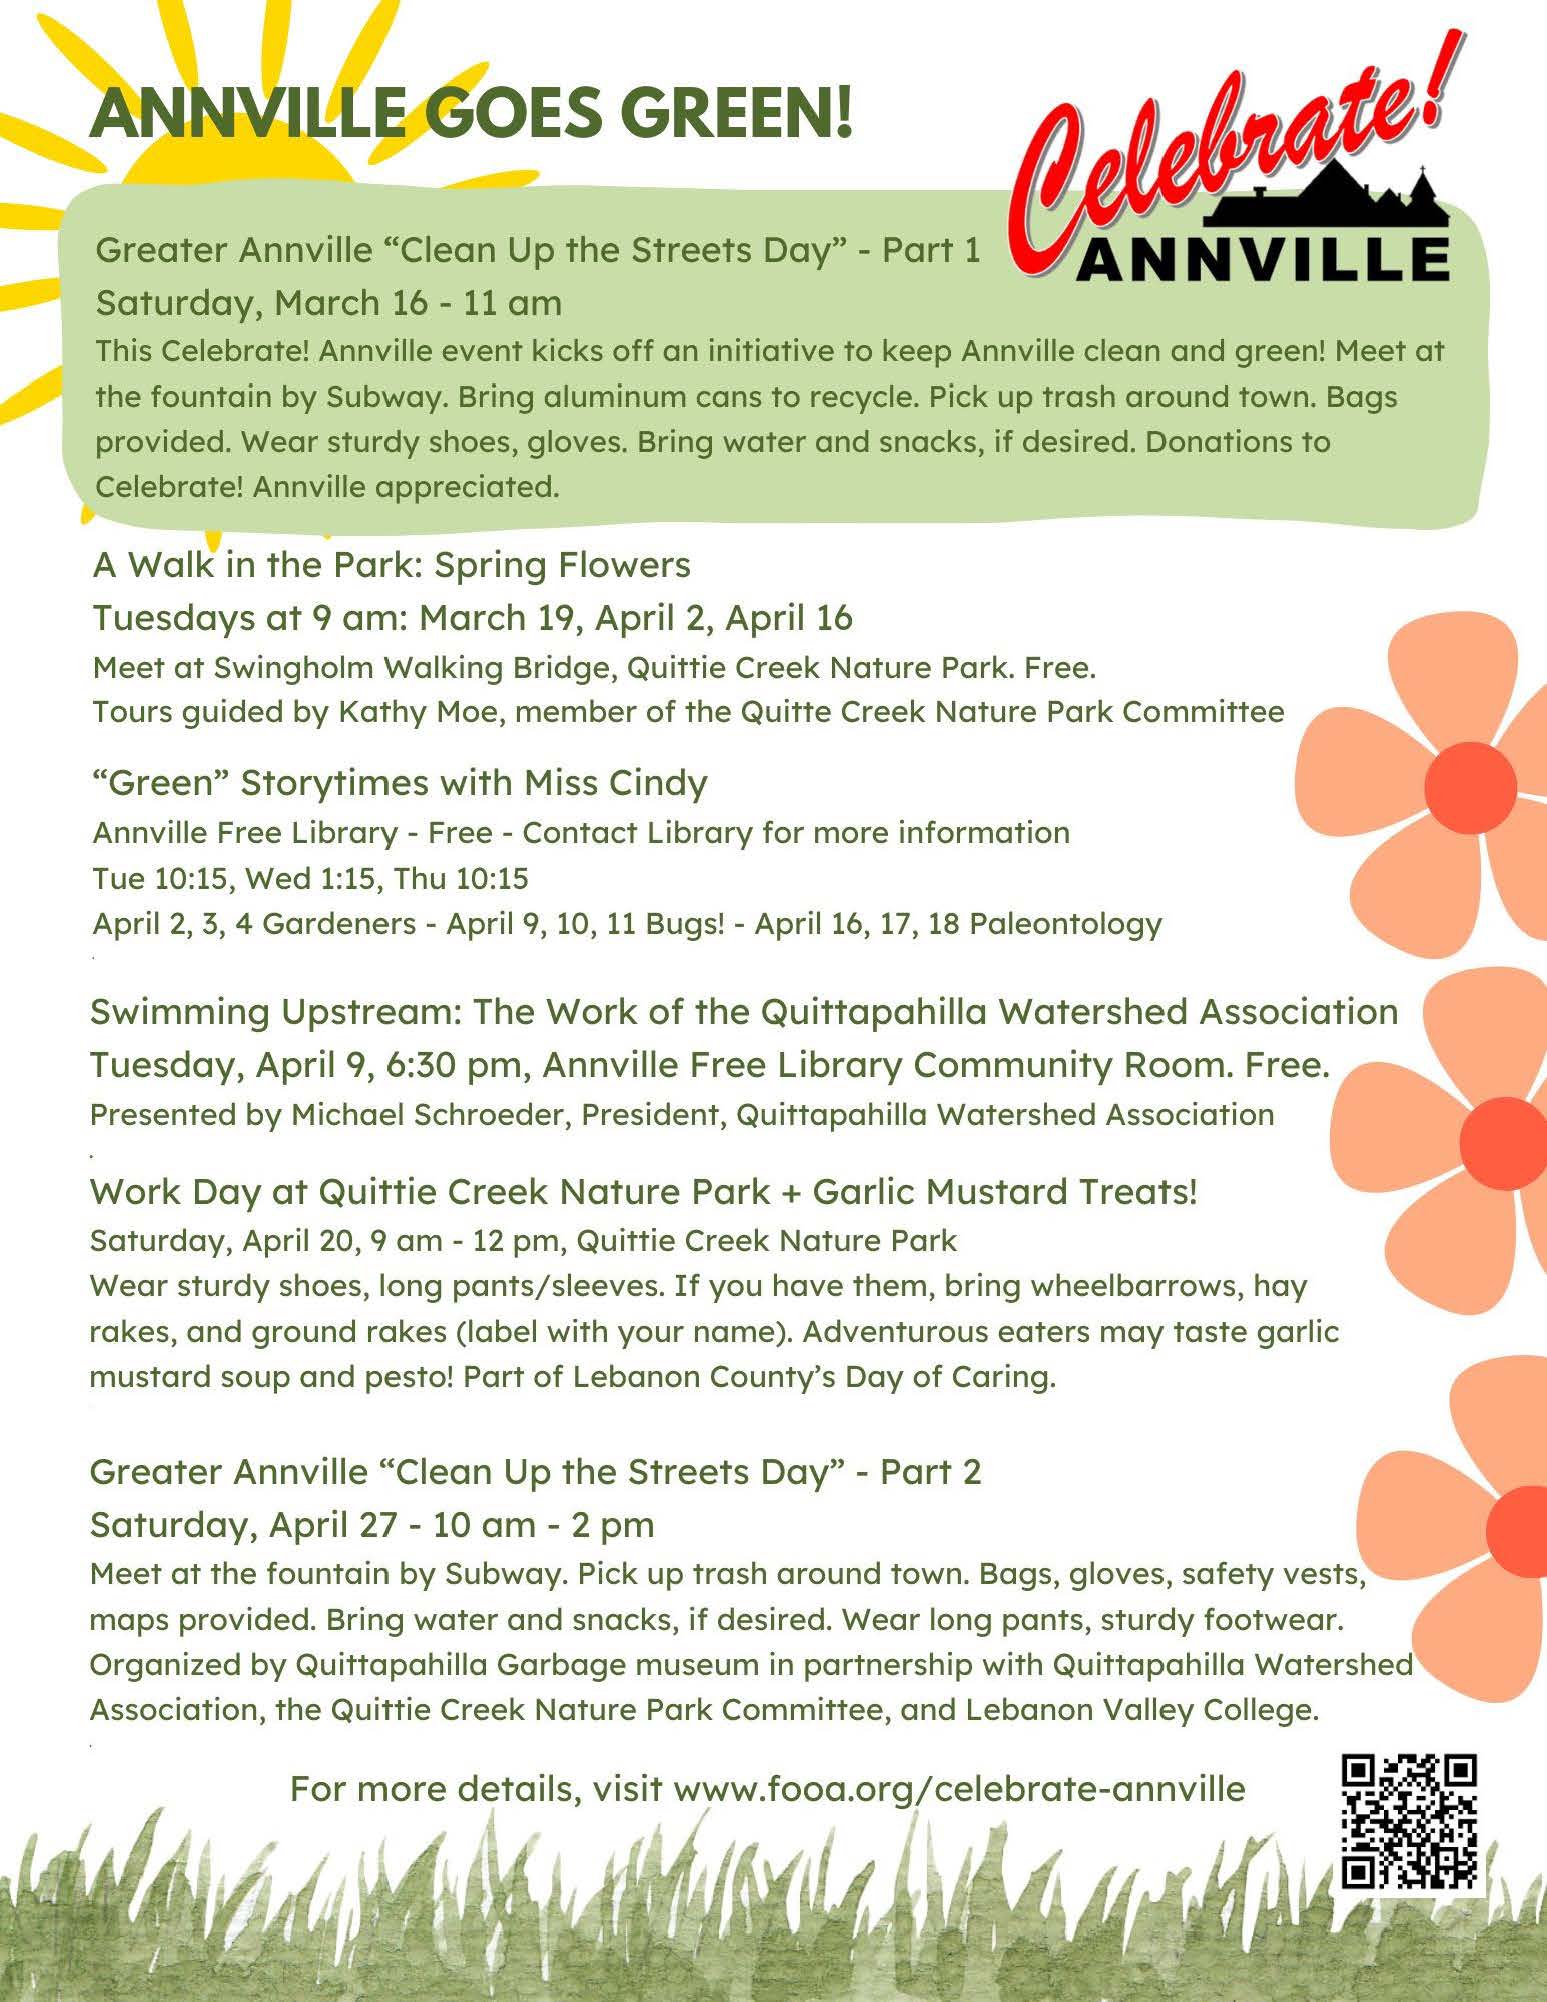 Annville Goes Green